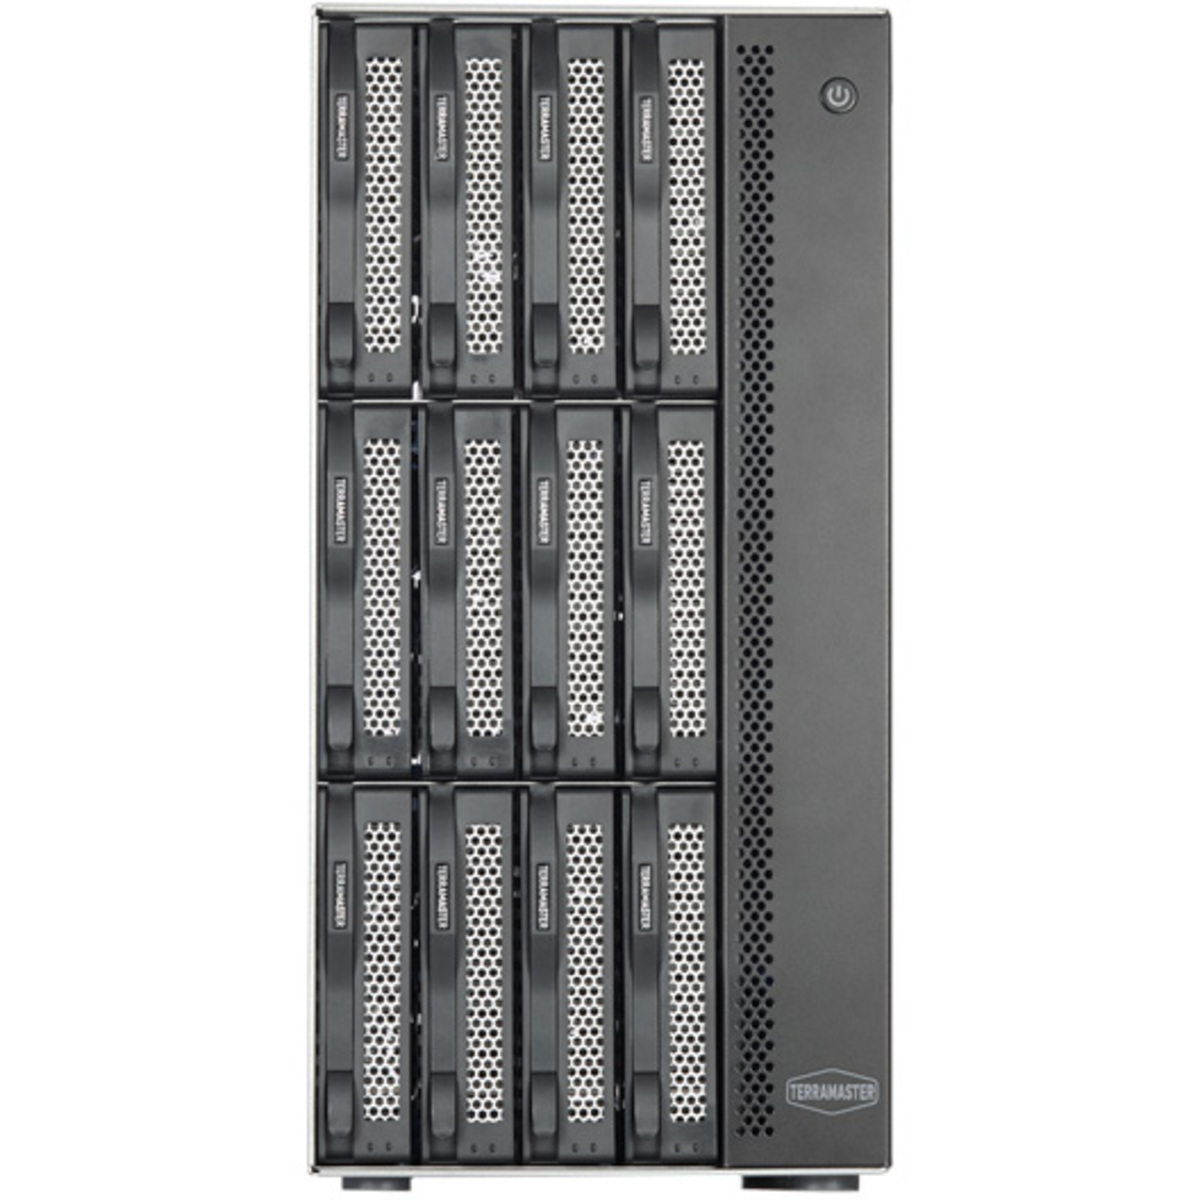 TerraMaster T12-423 64tb 12-Bay Desktop Multimedia / Power User / Business NAS - Network Attached Storage Device 8x8tb Seagate BarraCuda ST8000DM004 3.5 5400rpm SATA 6Gb/s HDD CONSUMER Class Drives Installed - Burn-In Tested T12-423